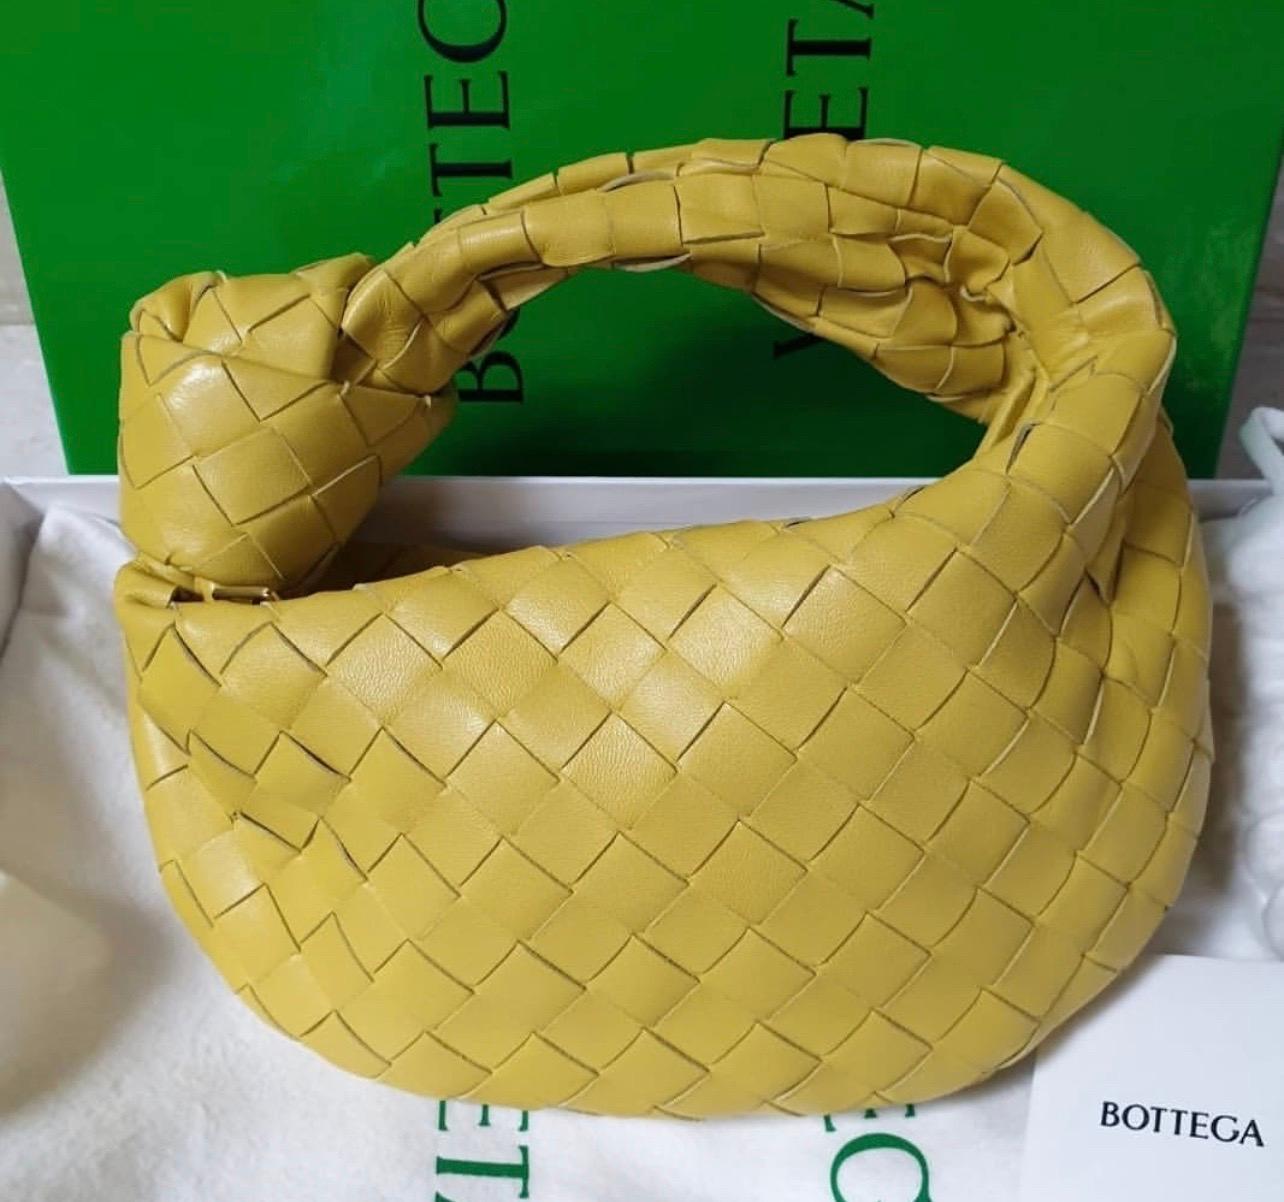 Bottega Veneta's signature intrecciato woven construction elevates this slouchy leather top handle bag.

    Knotted top handle
    Top zip
    One interior compartment
    Leather
    Made in Italy

Height 13.5cm-5.5